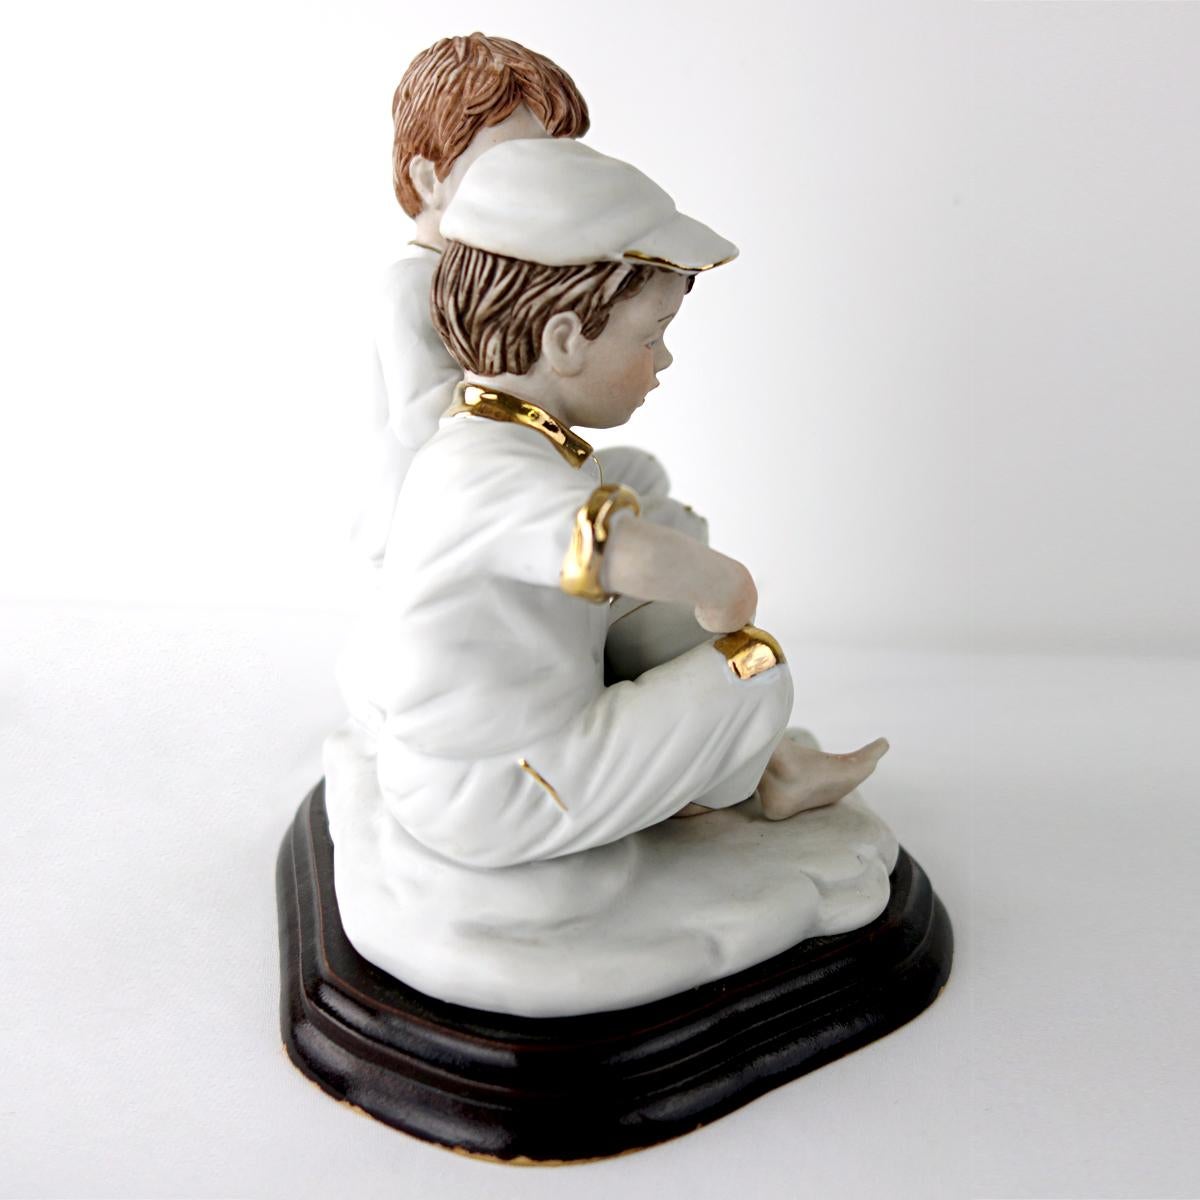 Biscuit Porcelain Statuette of Two Boys Eating a Melon with Gold-Colored Details For Sale 9